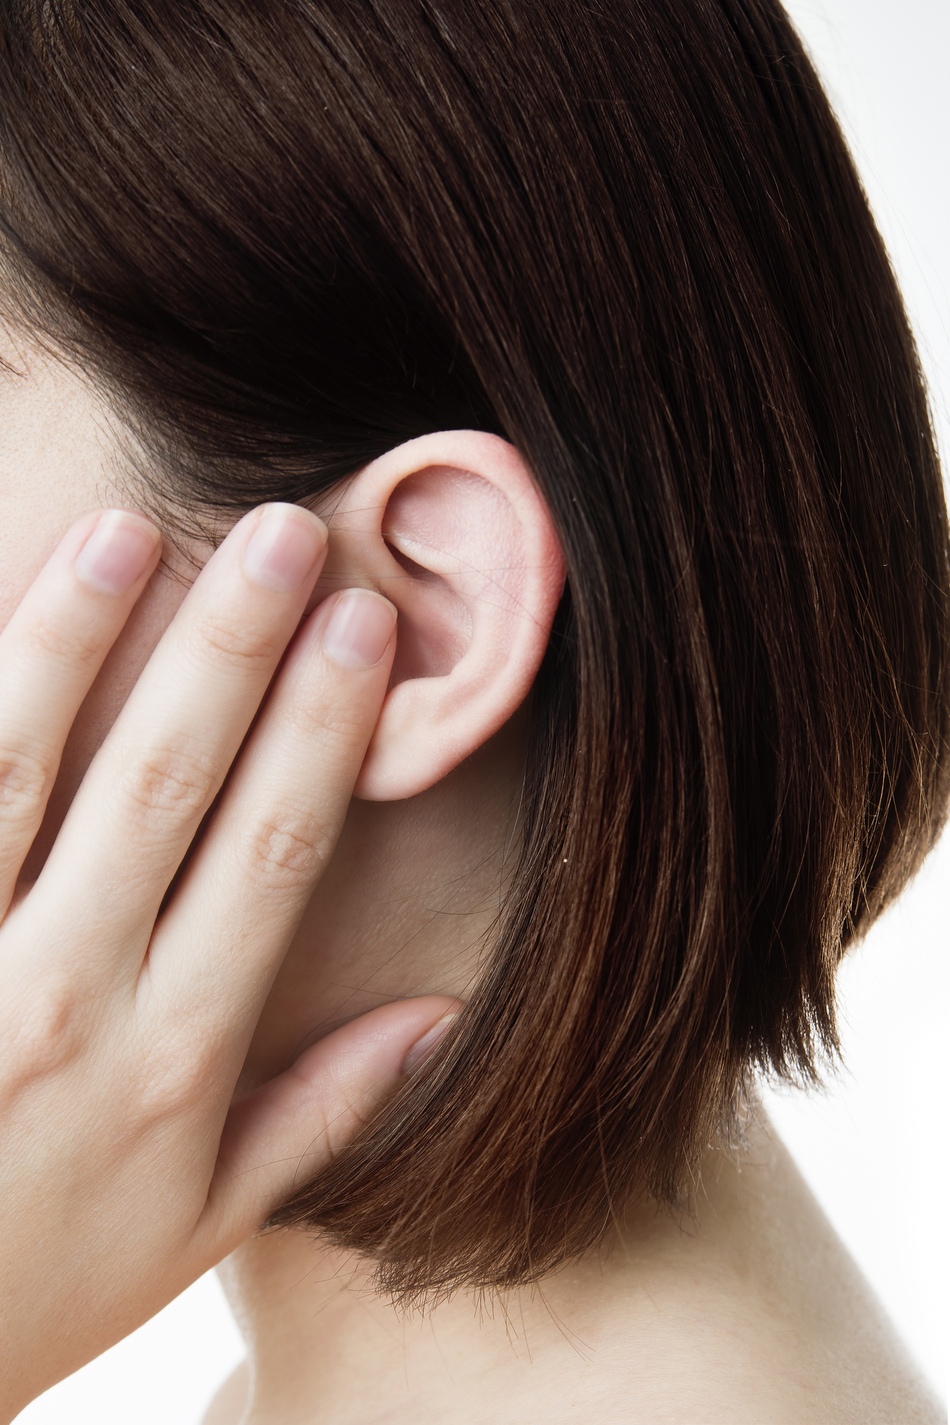 Tinnitus: Ringing or Buzzing Sound in Ears